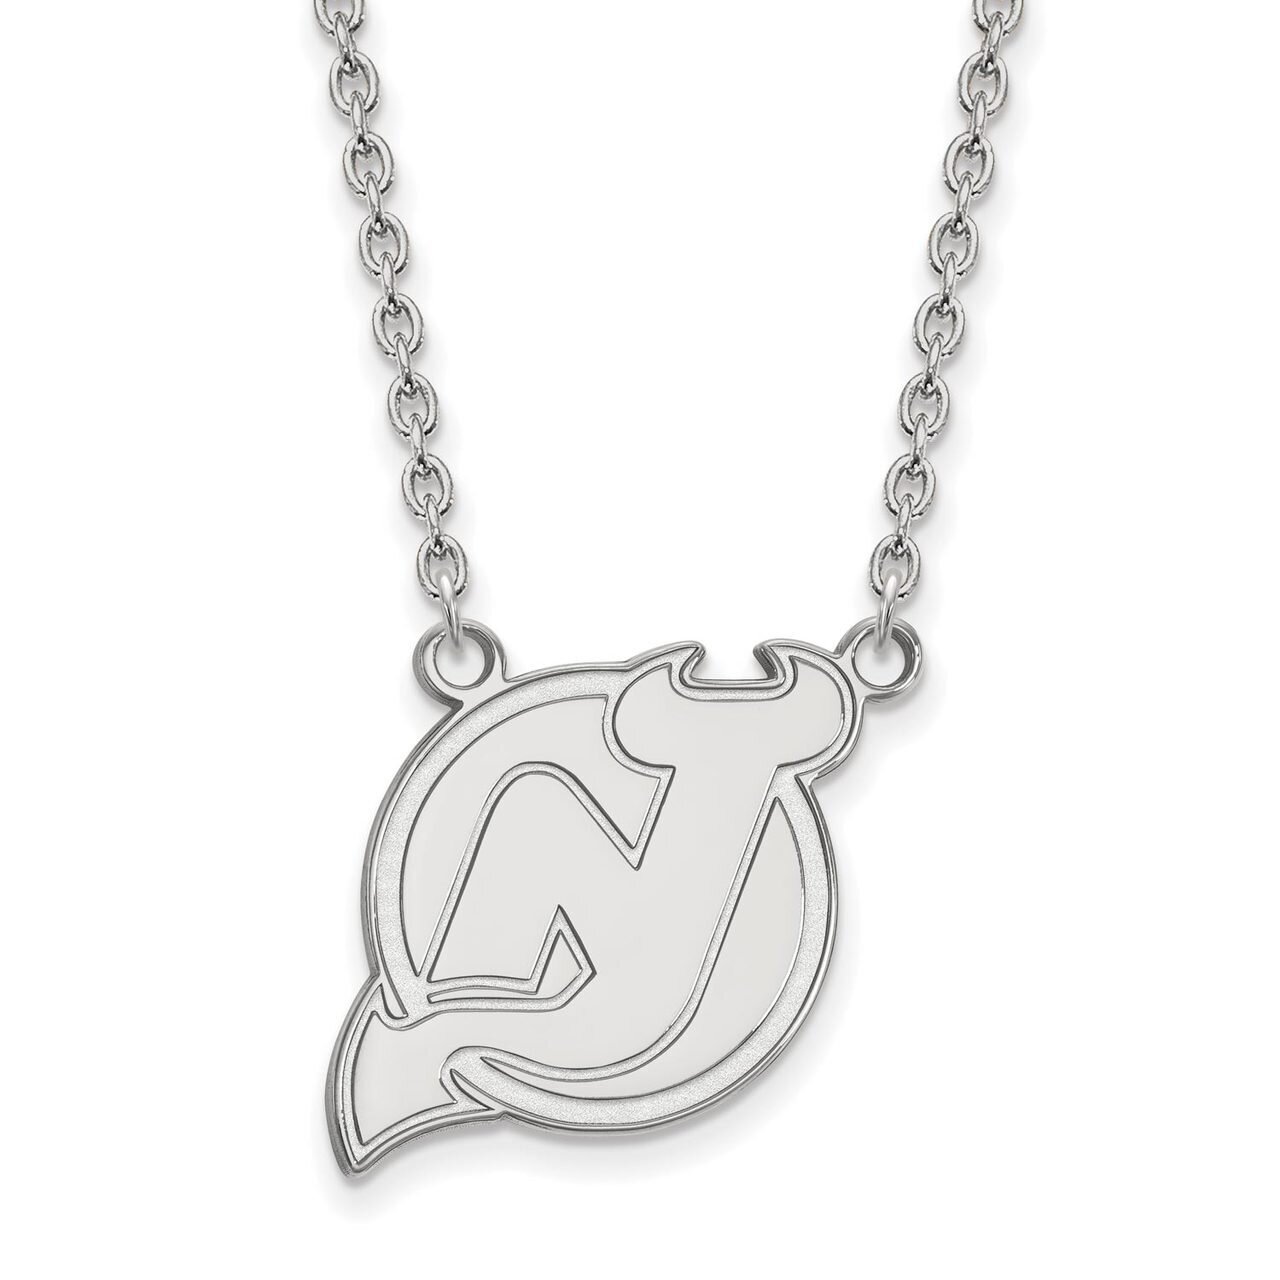 New Jersey Devils Large Pendant with Chain Necklace 14k White Gold 4W014DVL-18